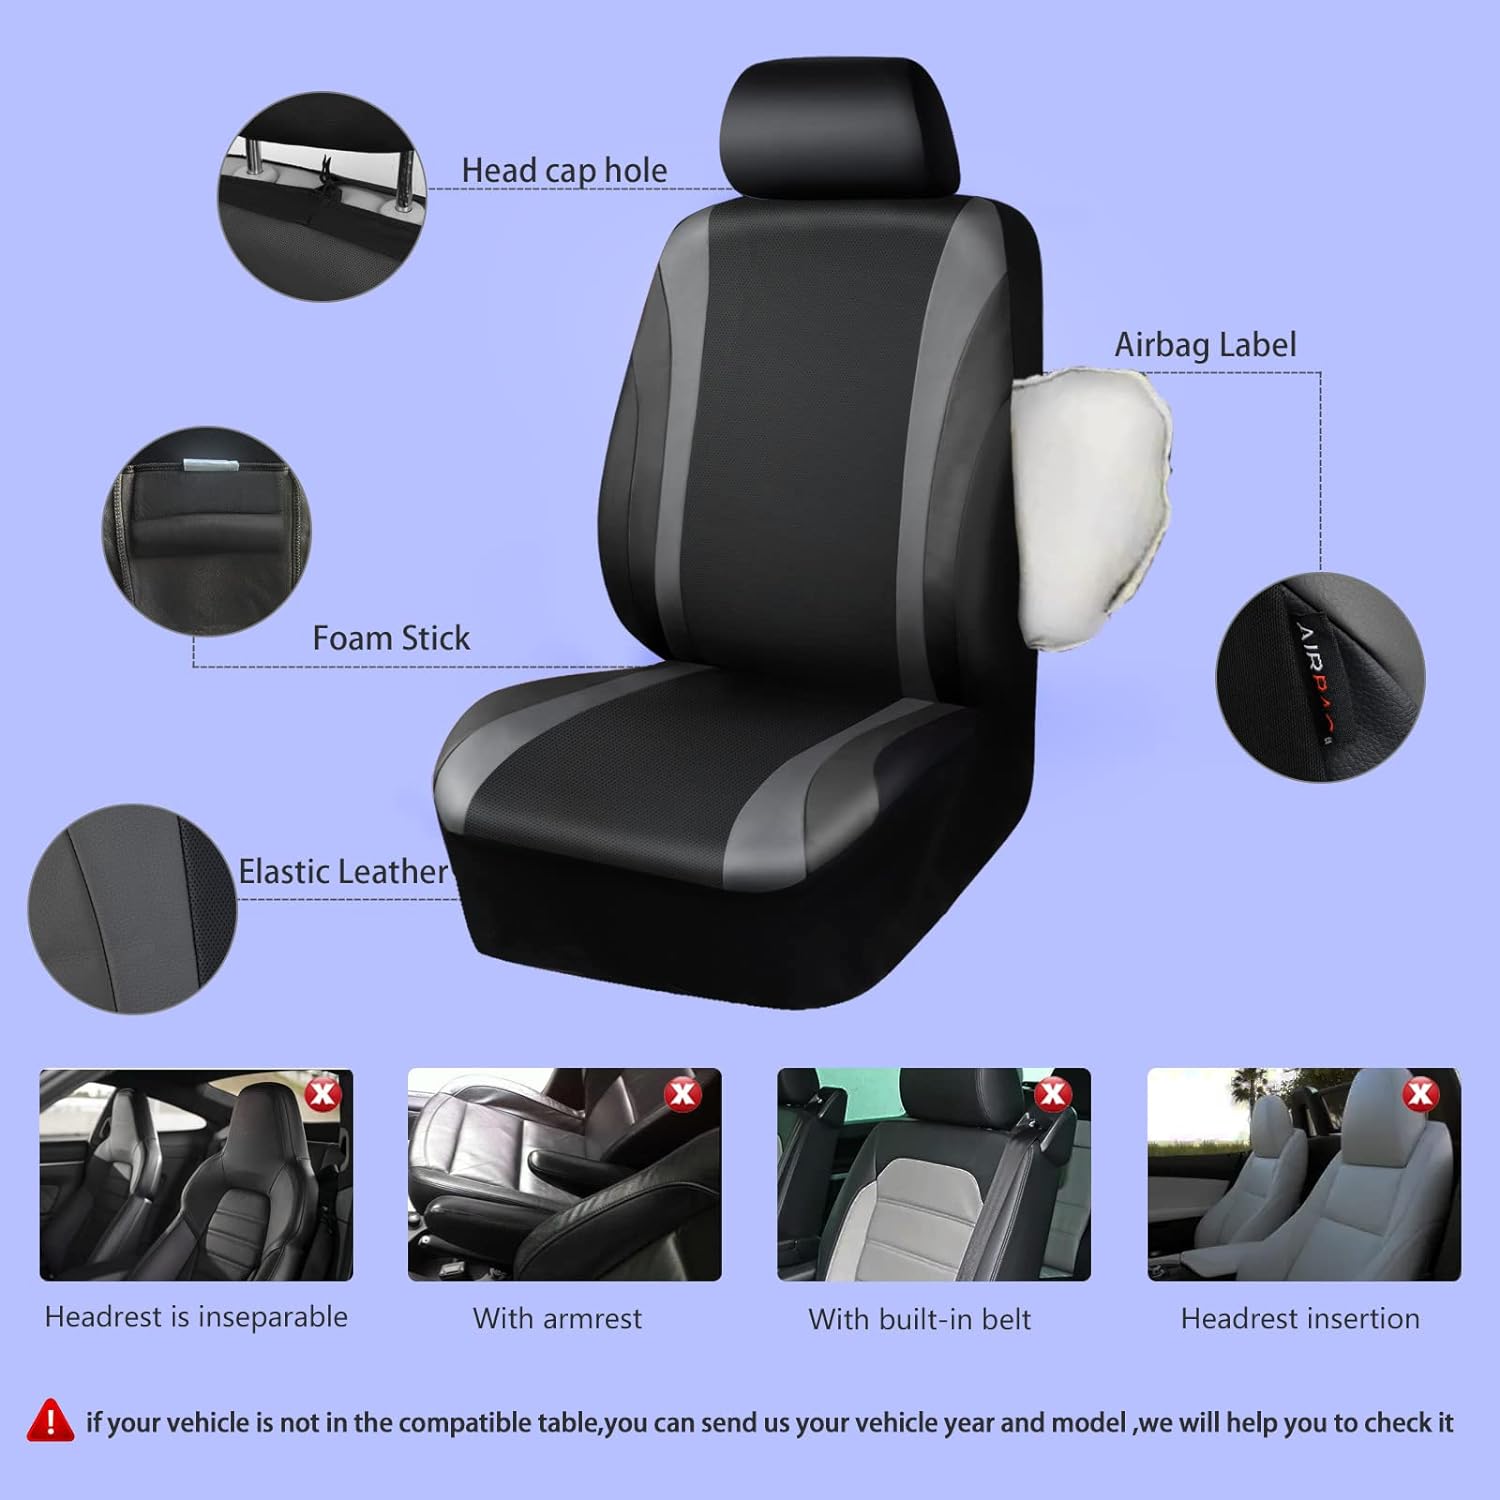 CAR PASS Leather Car Seat Covers Full Set,Waterproof Automotive Seat Covers for Cars SUV Sedan Truck,Airbag Compatible,5mm Composite Sponge,Sporty Universal Fit for Cute Women Girl